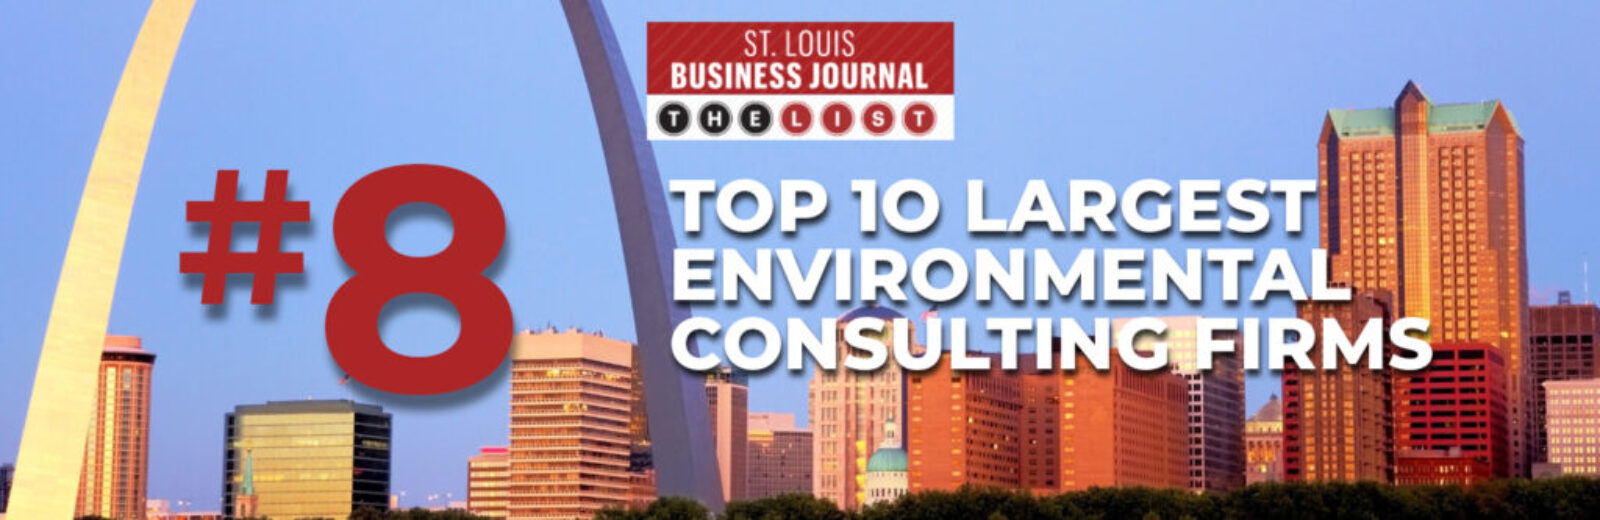 Wellington voted #8 in St. Louis Business Journals Top 10 Largest Environmental Consulting Firms